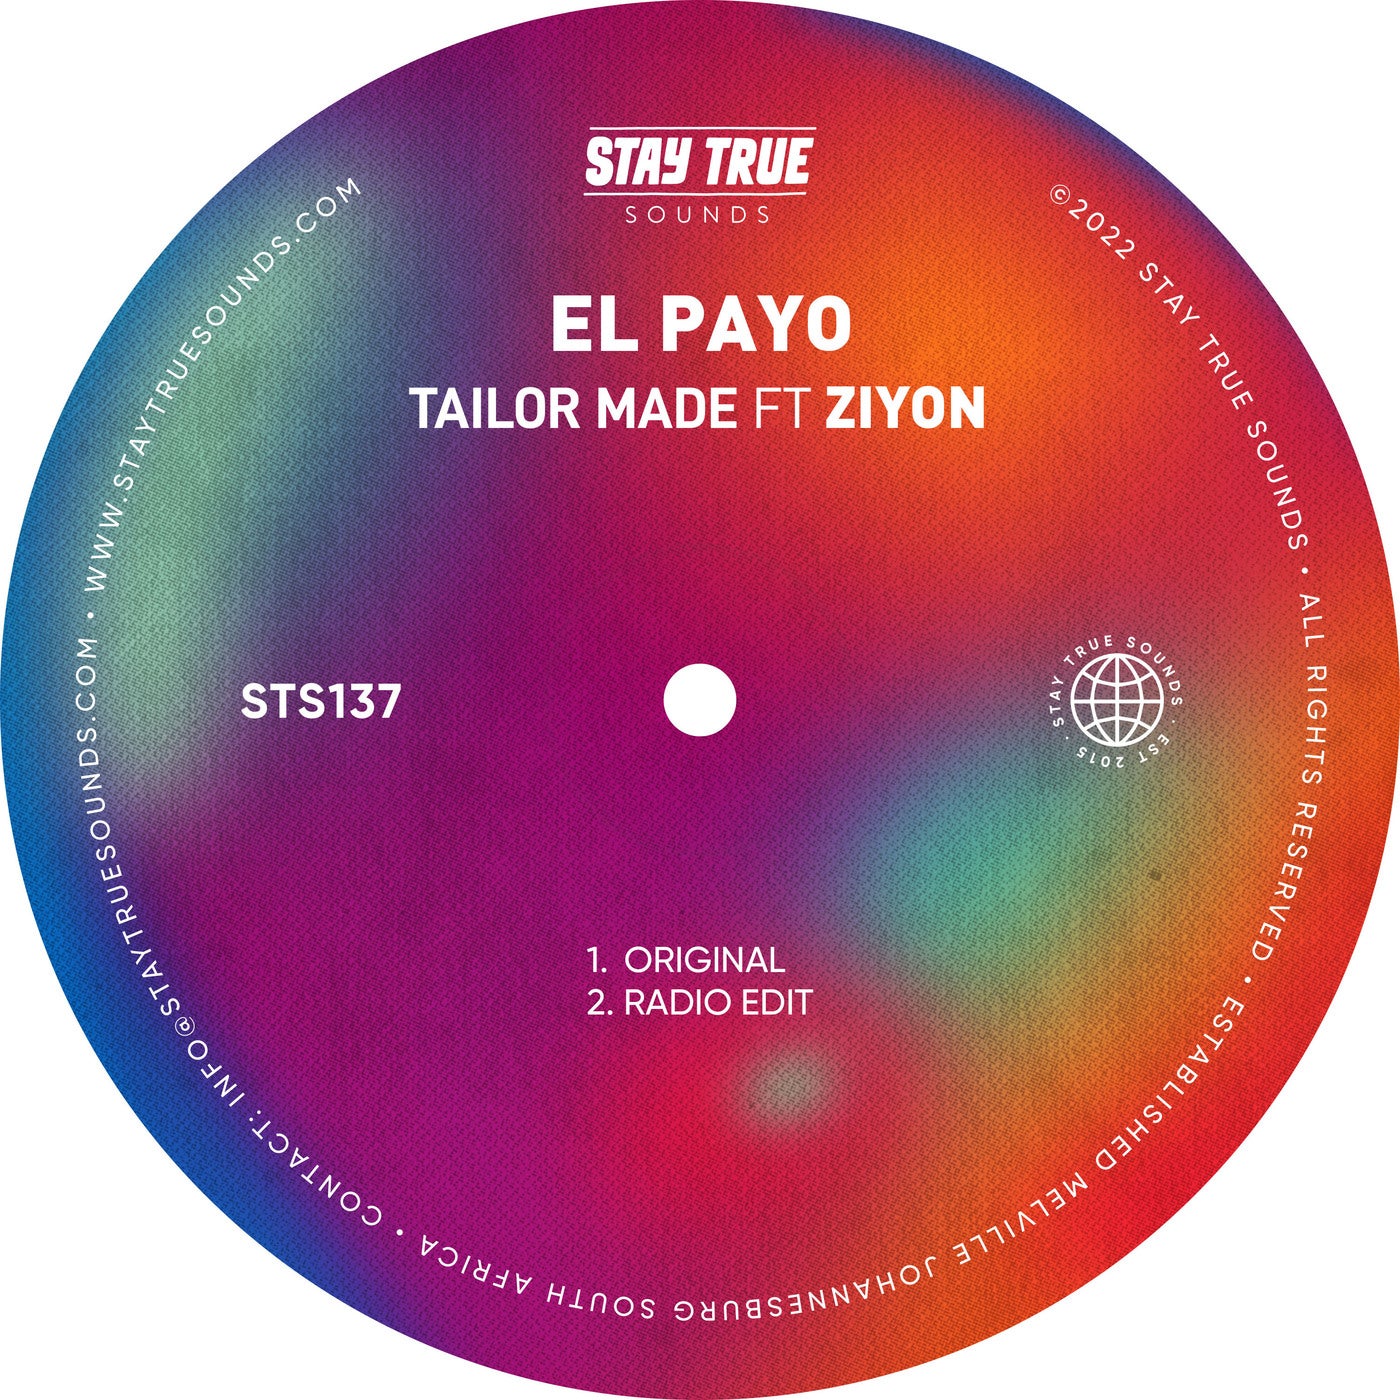 El Payo - Tailor Made (feat. Ziyon) [Stay True Sounds]